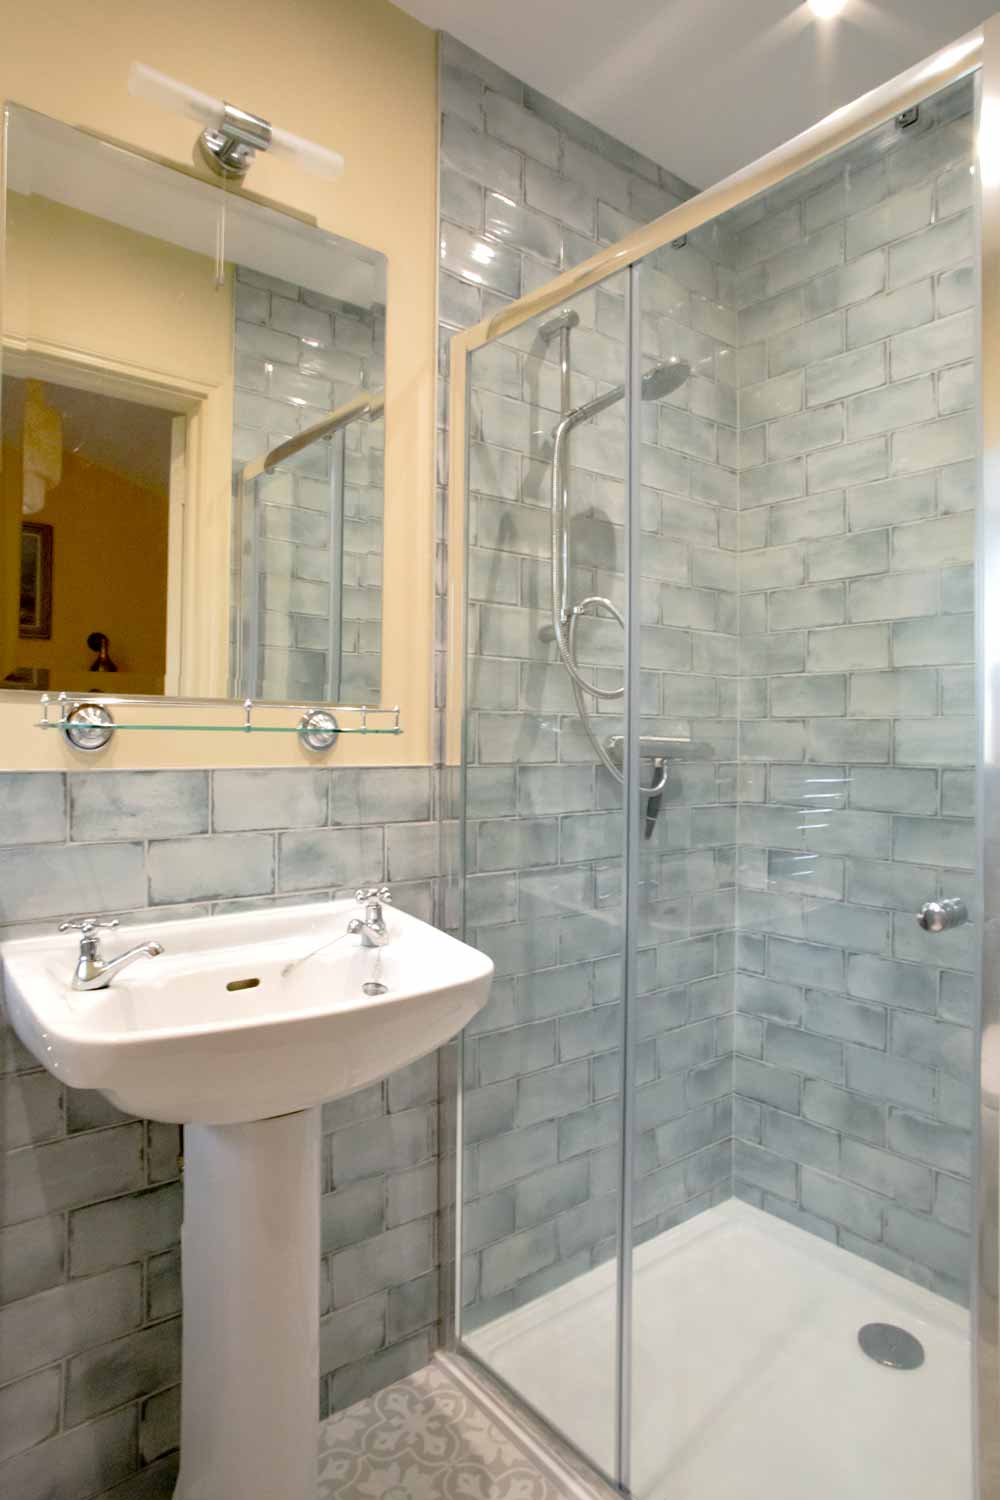 Luxury Self Catering Bathroom-at The Old Stables Moyglare